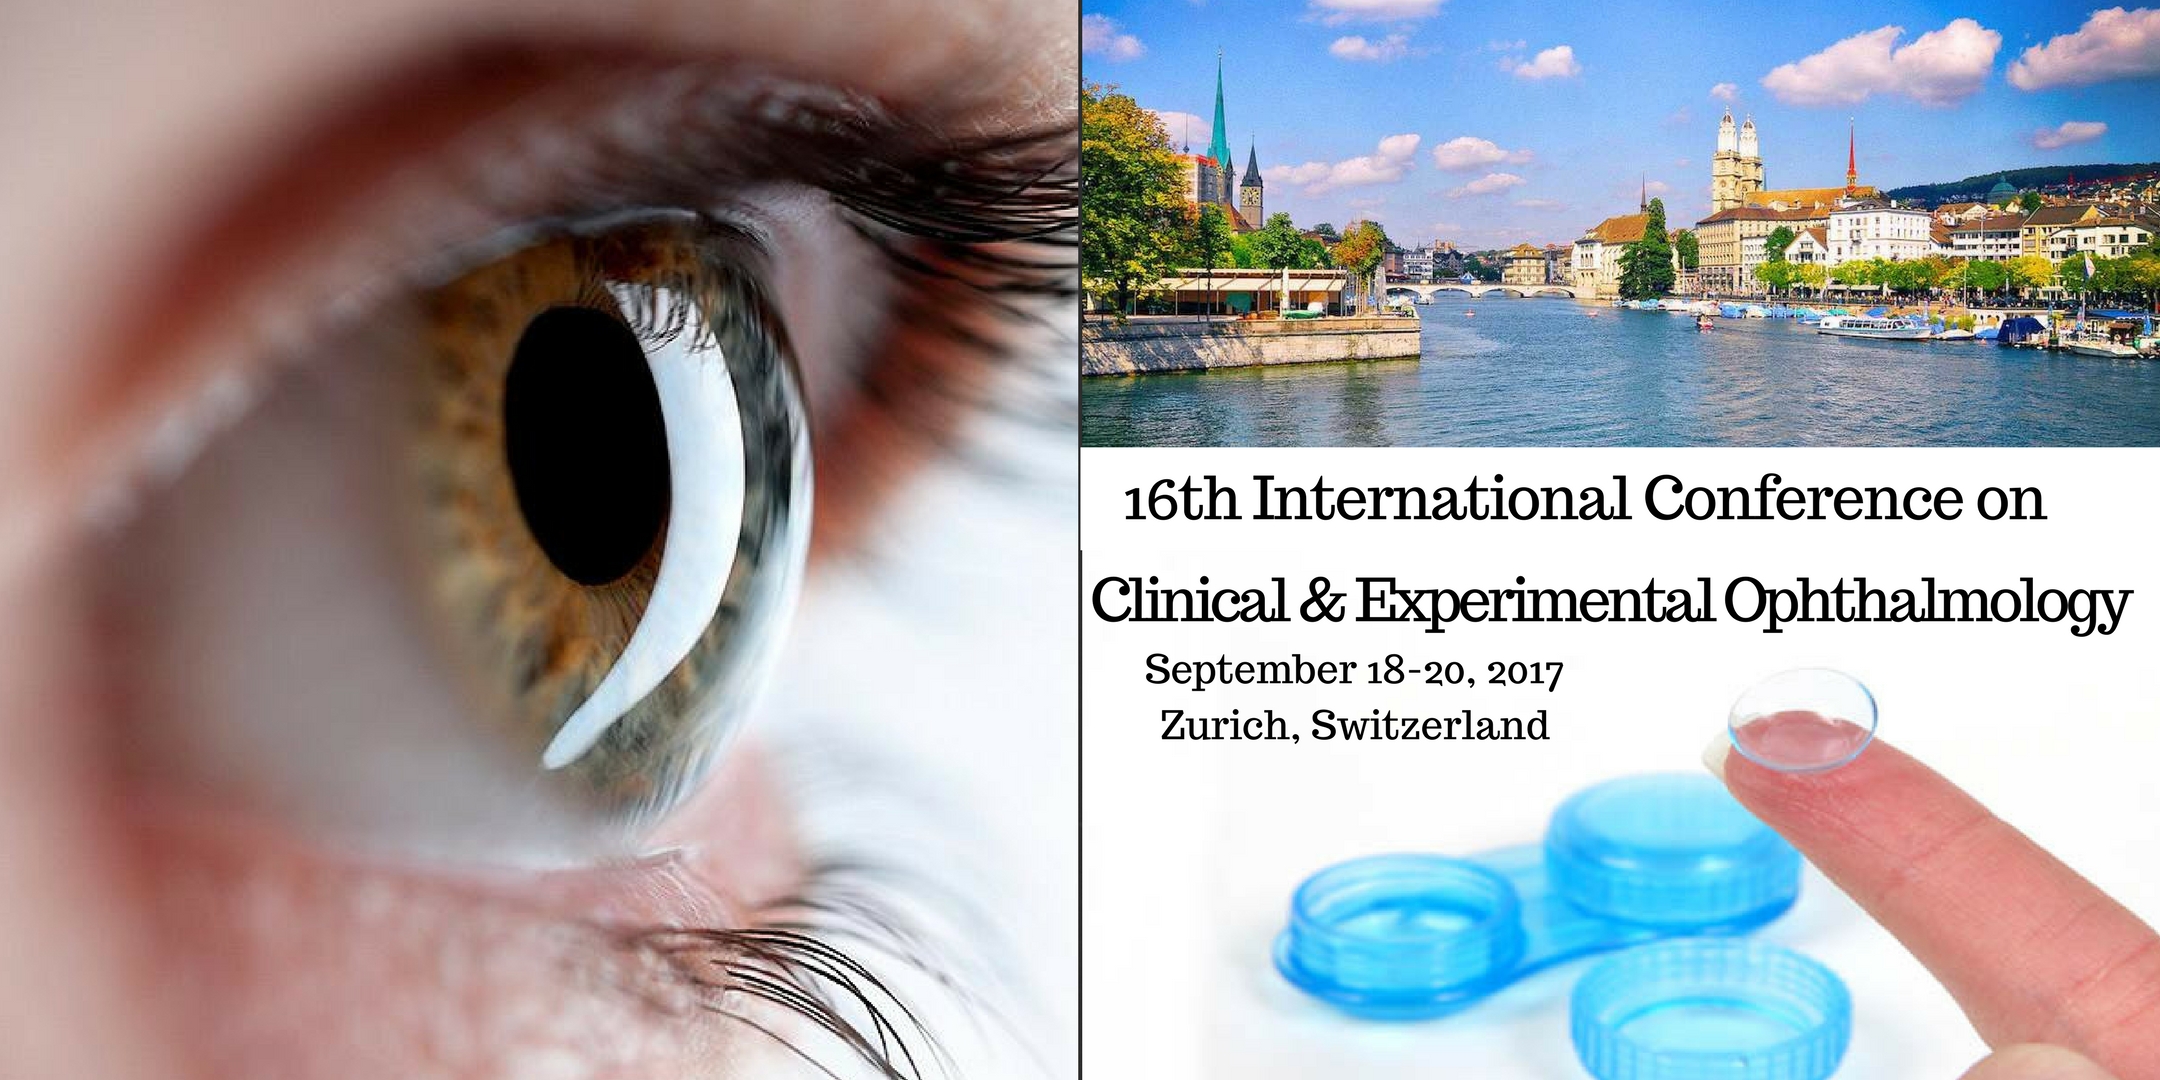 We cordially invites you to participate at the 16th International Conference on Clinical and Experimental Ophthalmology (CME+CPD accredited) to be held during September 18-20, 2017 at Zurich, Switzerland. The theme of the conference is Accelerating the science of eye which highlights the significance of vision and also explores the spectrum of latest technological developments in the field of Ophthalmology.